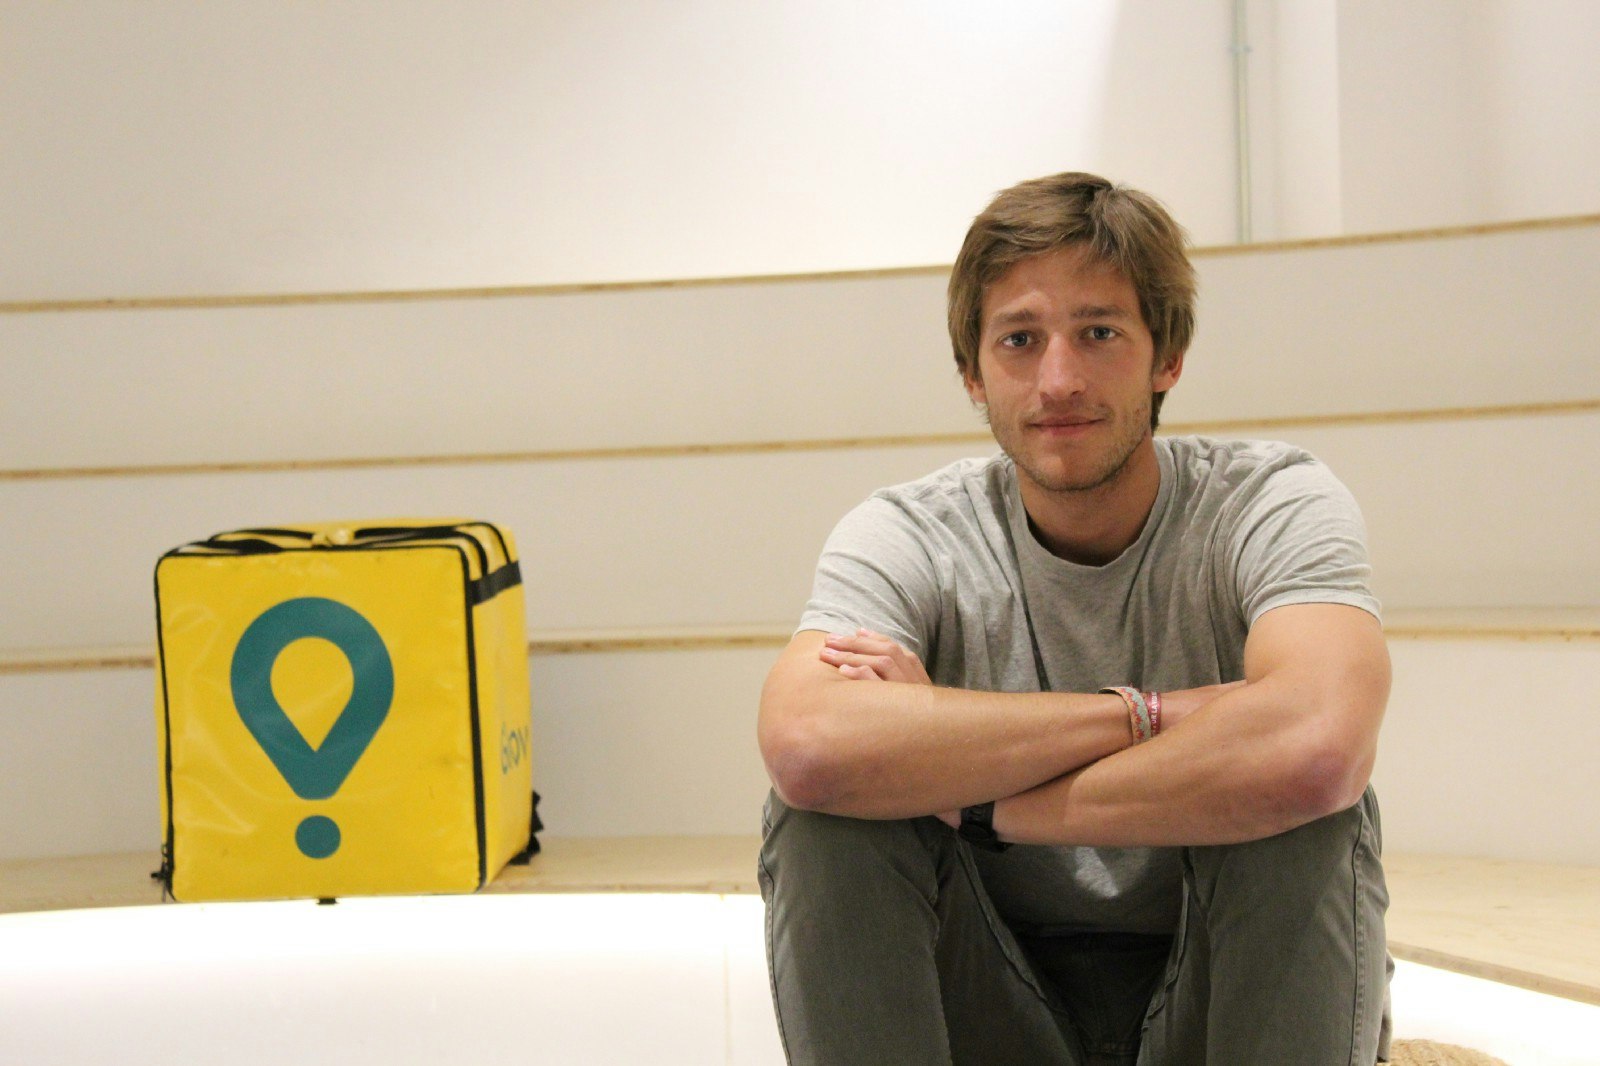 Glovo founder Oscar Pierre sitting on a set of stairs next to a Glovo delivery bag.